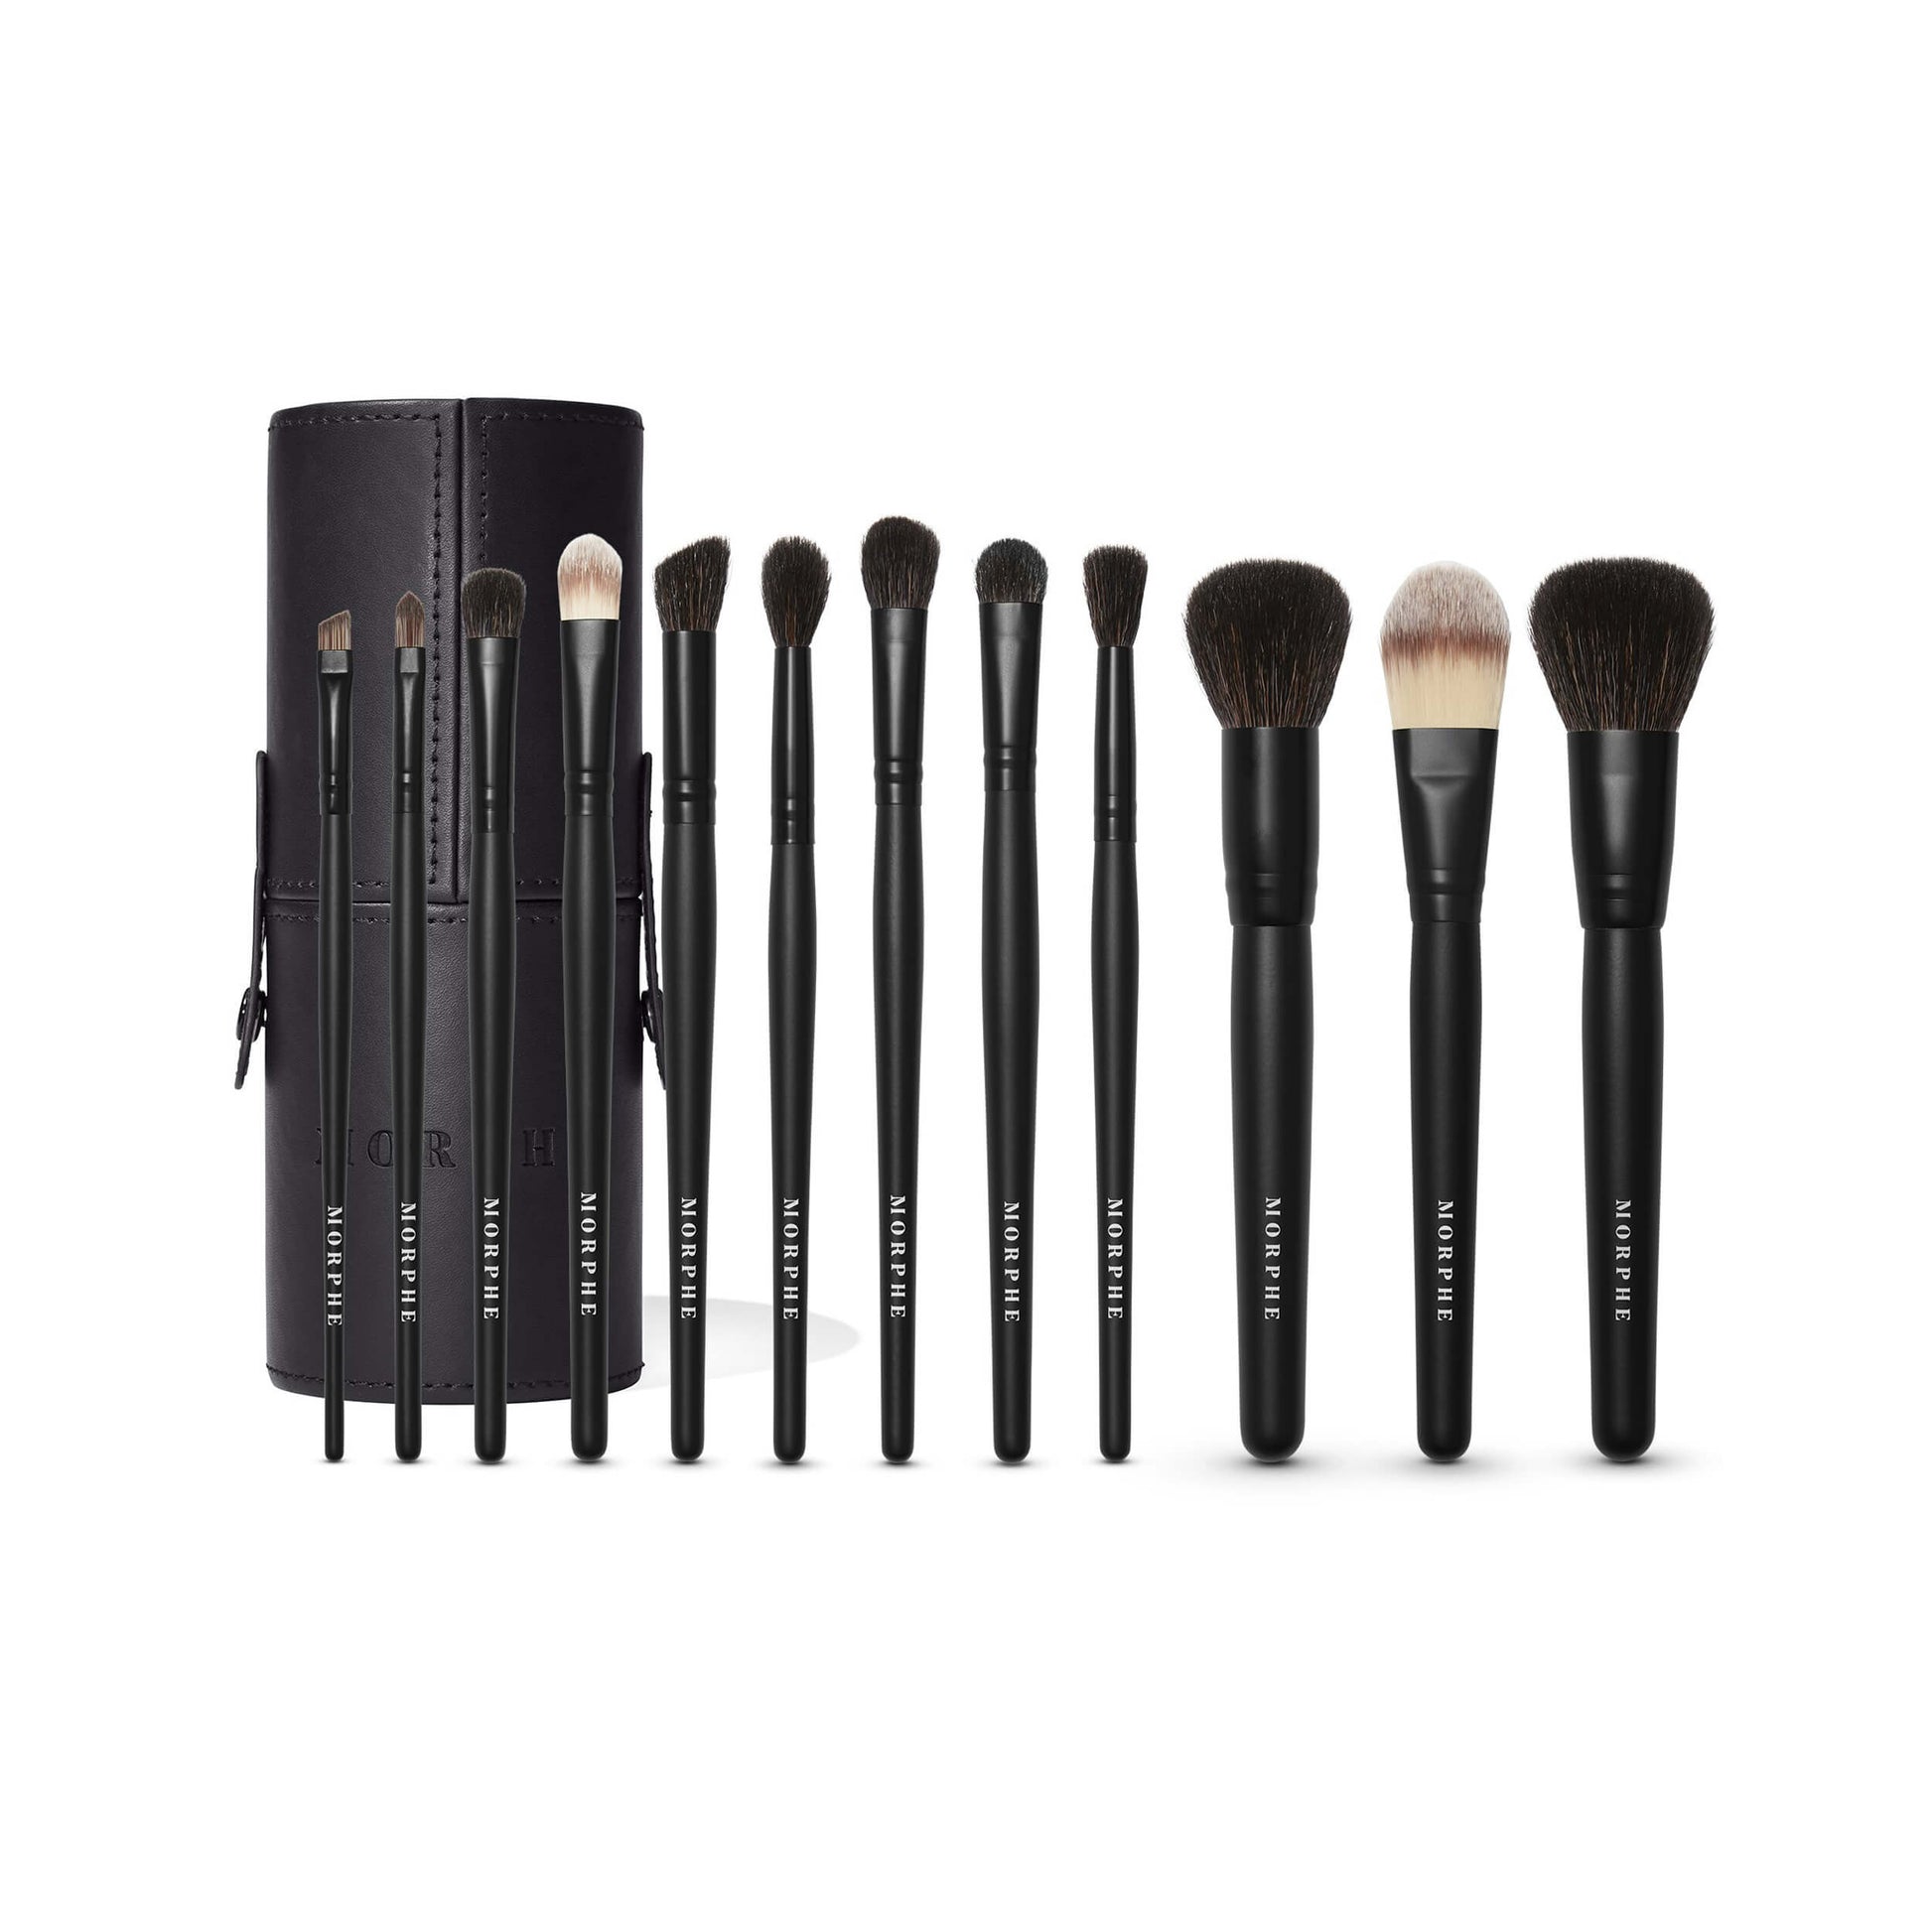 Morphe Cosmetics Vacay Mode Brush Collection